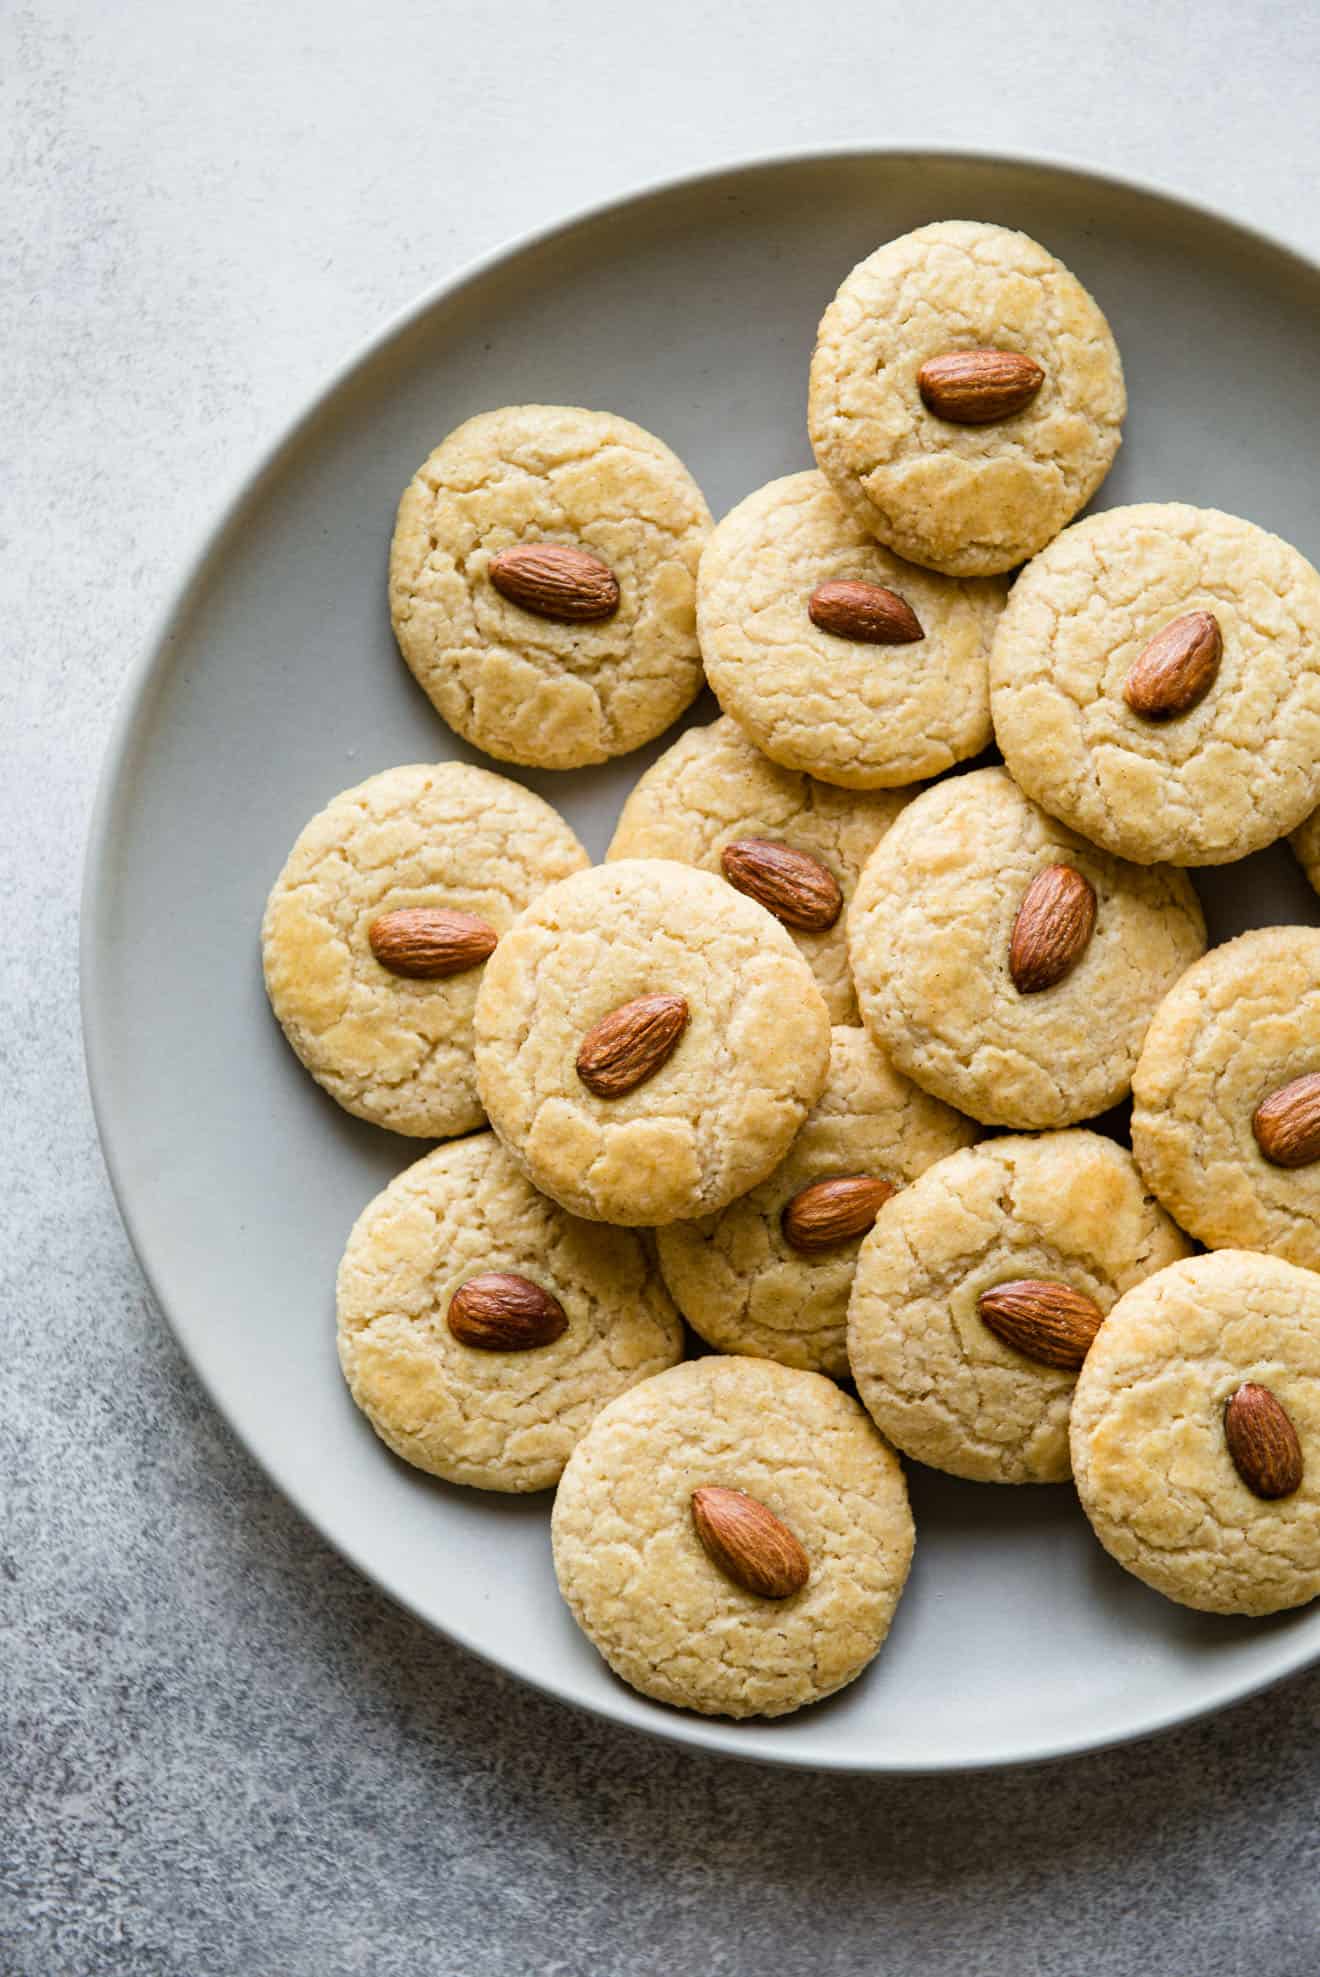 Gluten-Free Chinese Almond Cookies - great for the holiday season or for any party! #dessert #glutenfree